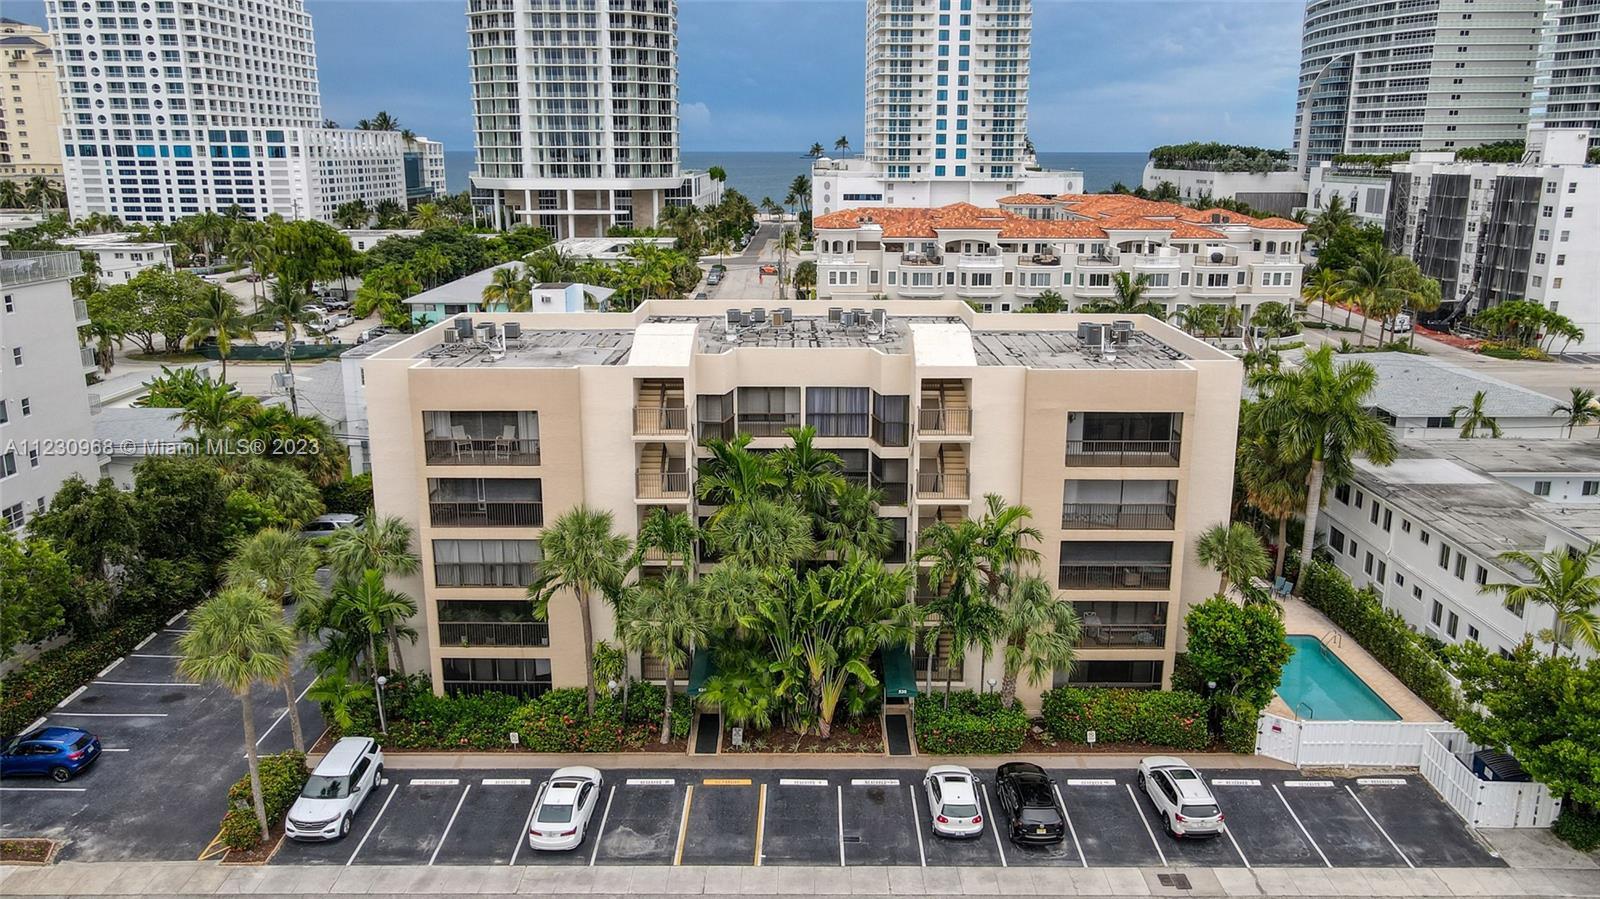 Photo of 520 Orton Ave #403 in Fort Lauderdale, FL